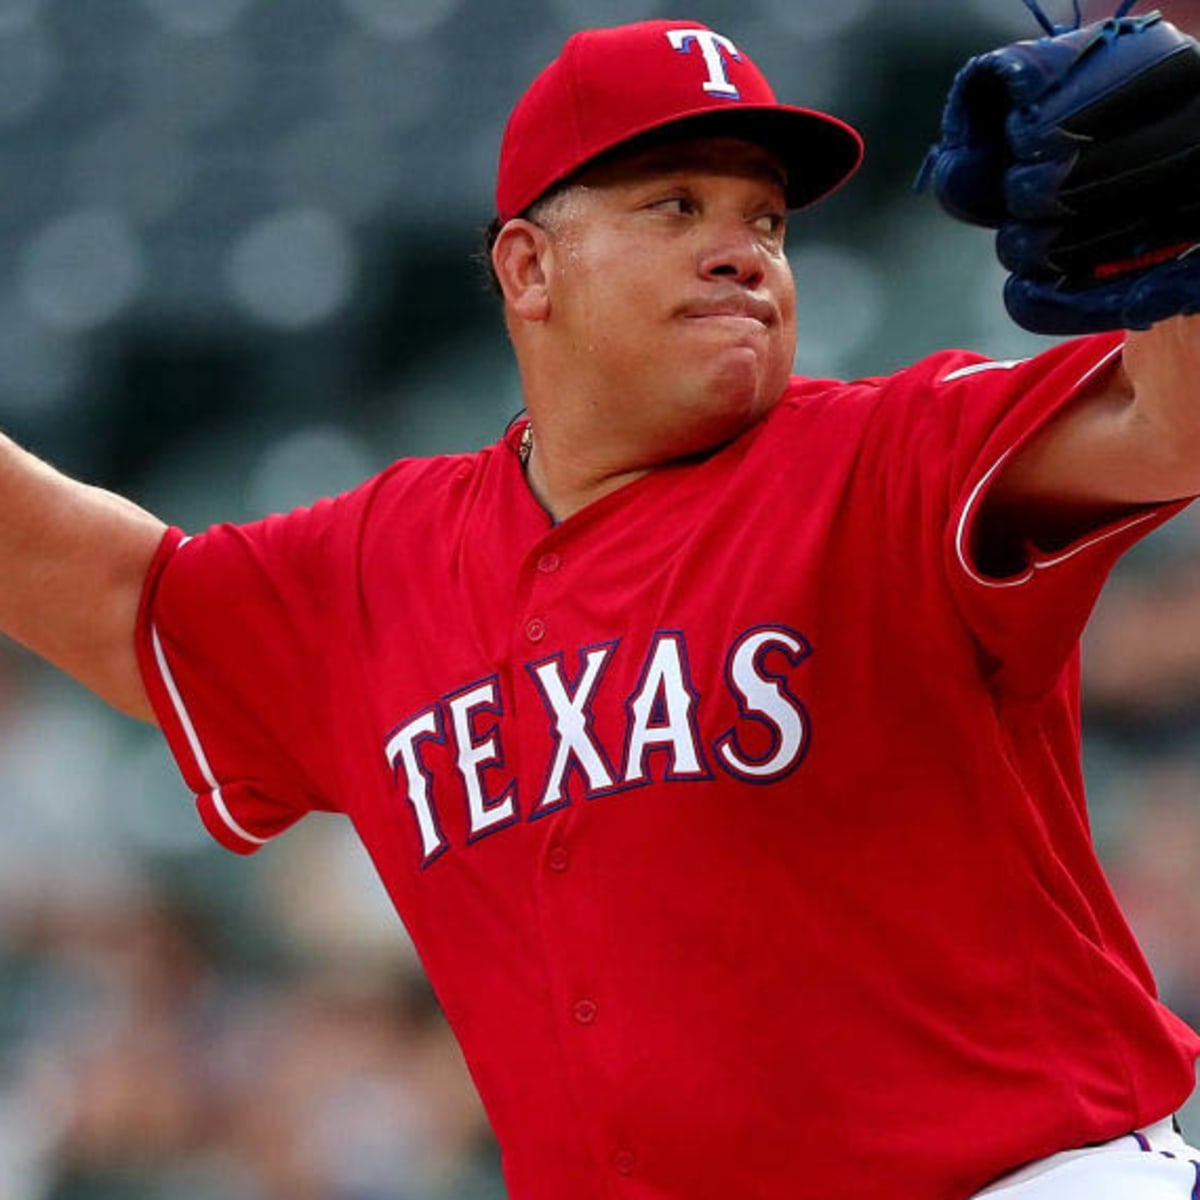 Bartolo Colon plans to pitch in 2019 at 45 years old - Sports